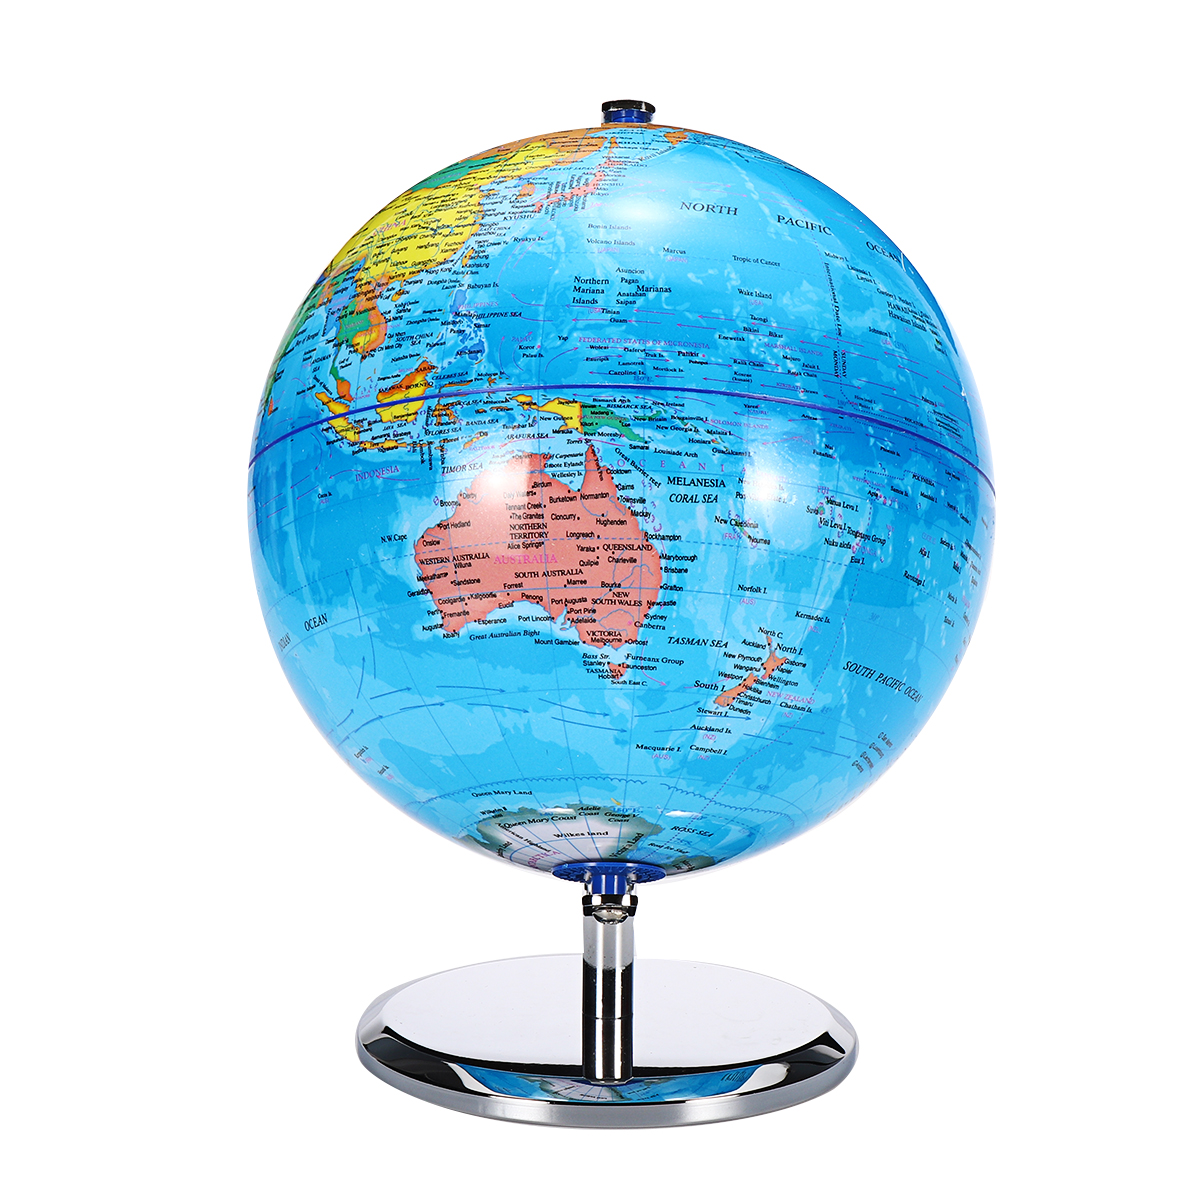 8inch-Stand-Rotating-World-Globe-Map-Kids-Toy-School-Student-Educational-Gift-1783975-6